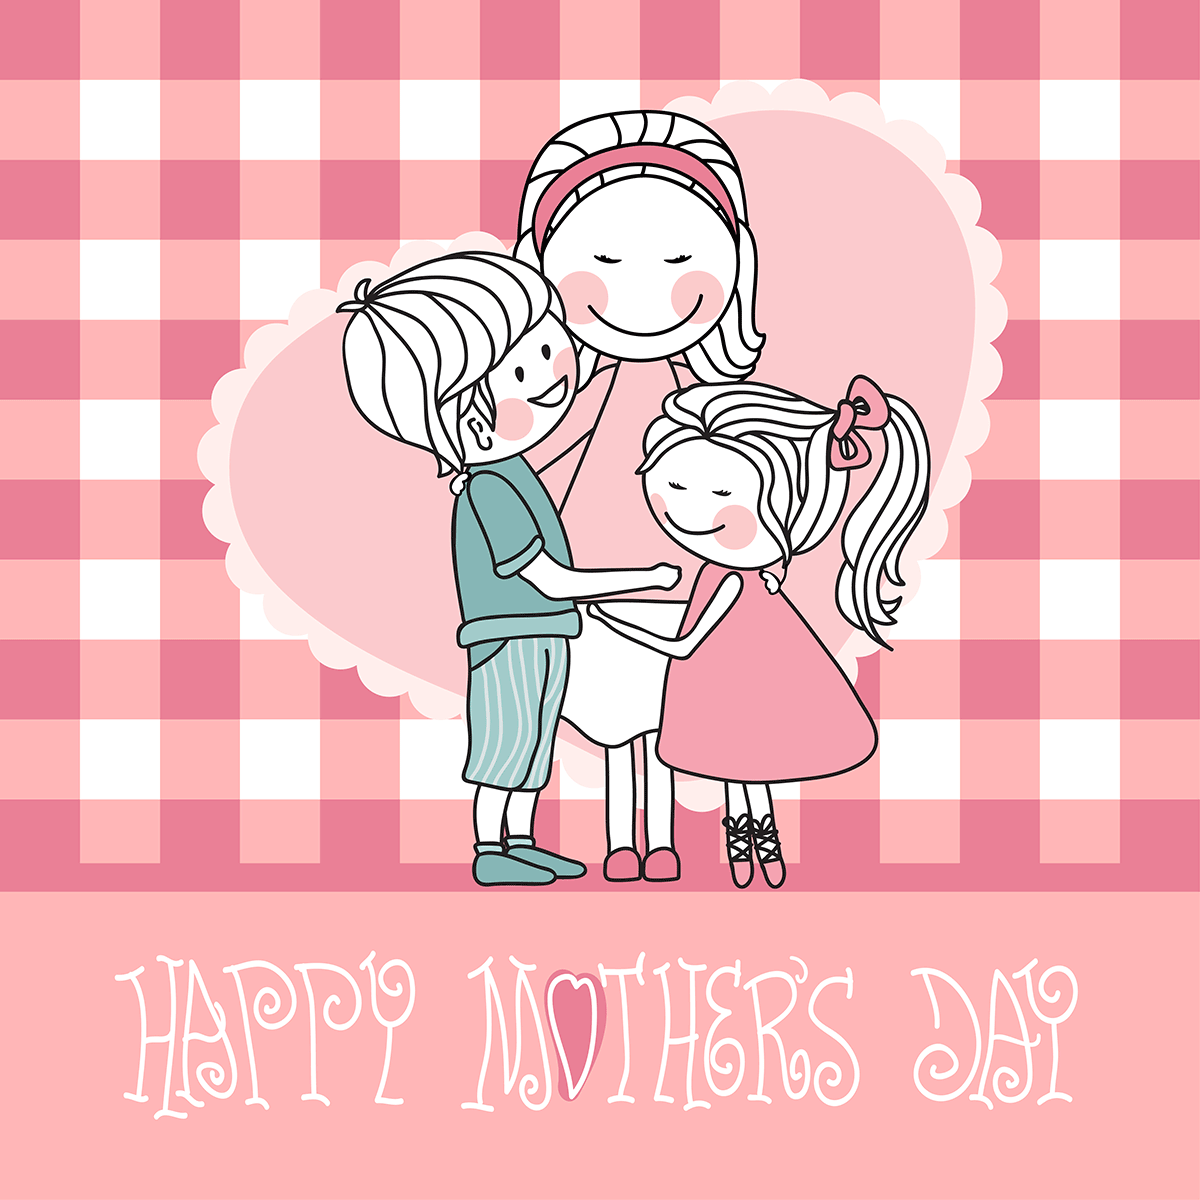 Plaid red and white Mother's Day card with 2 children and a heart in the background.